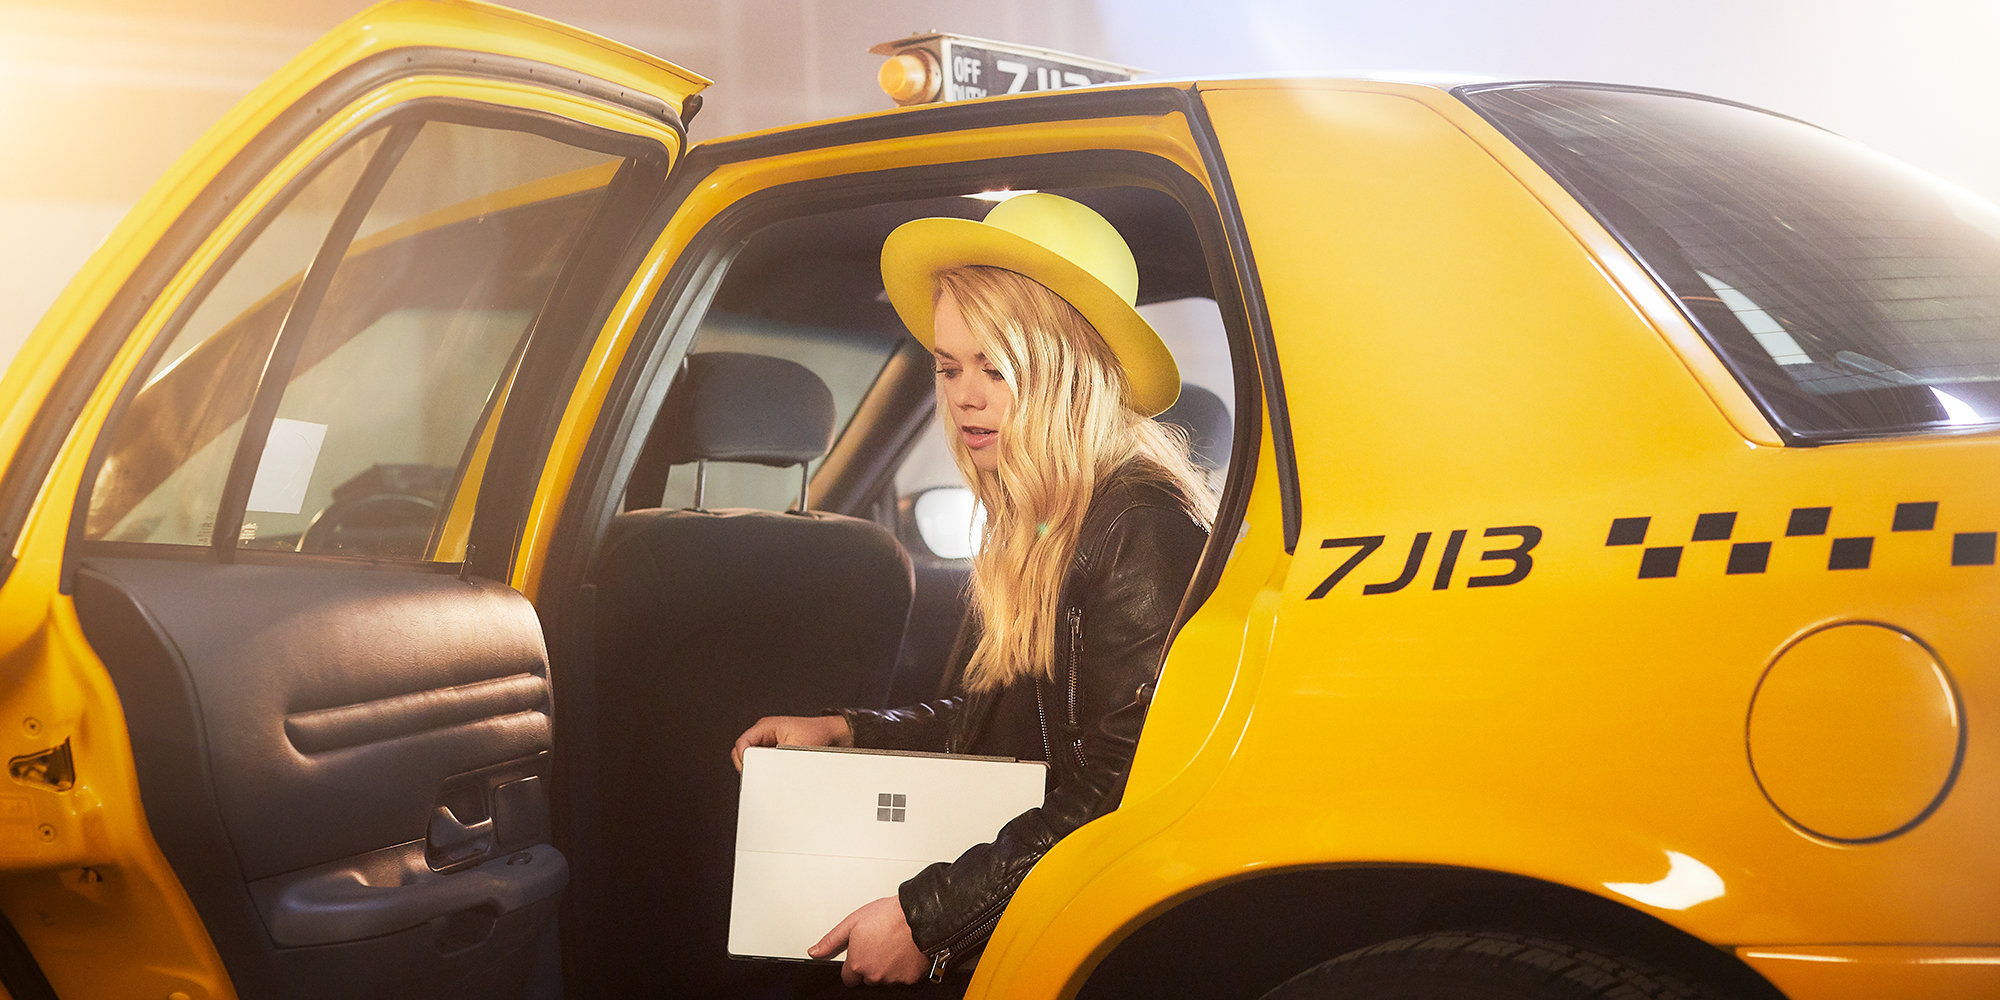 Woman with yellow hat stepping out of yellow cab with a Surface